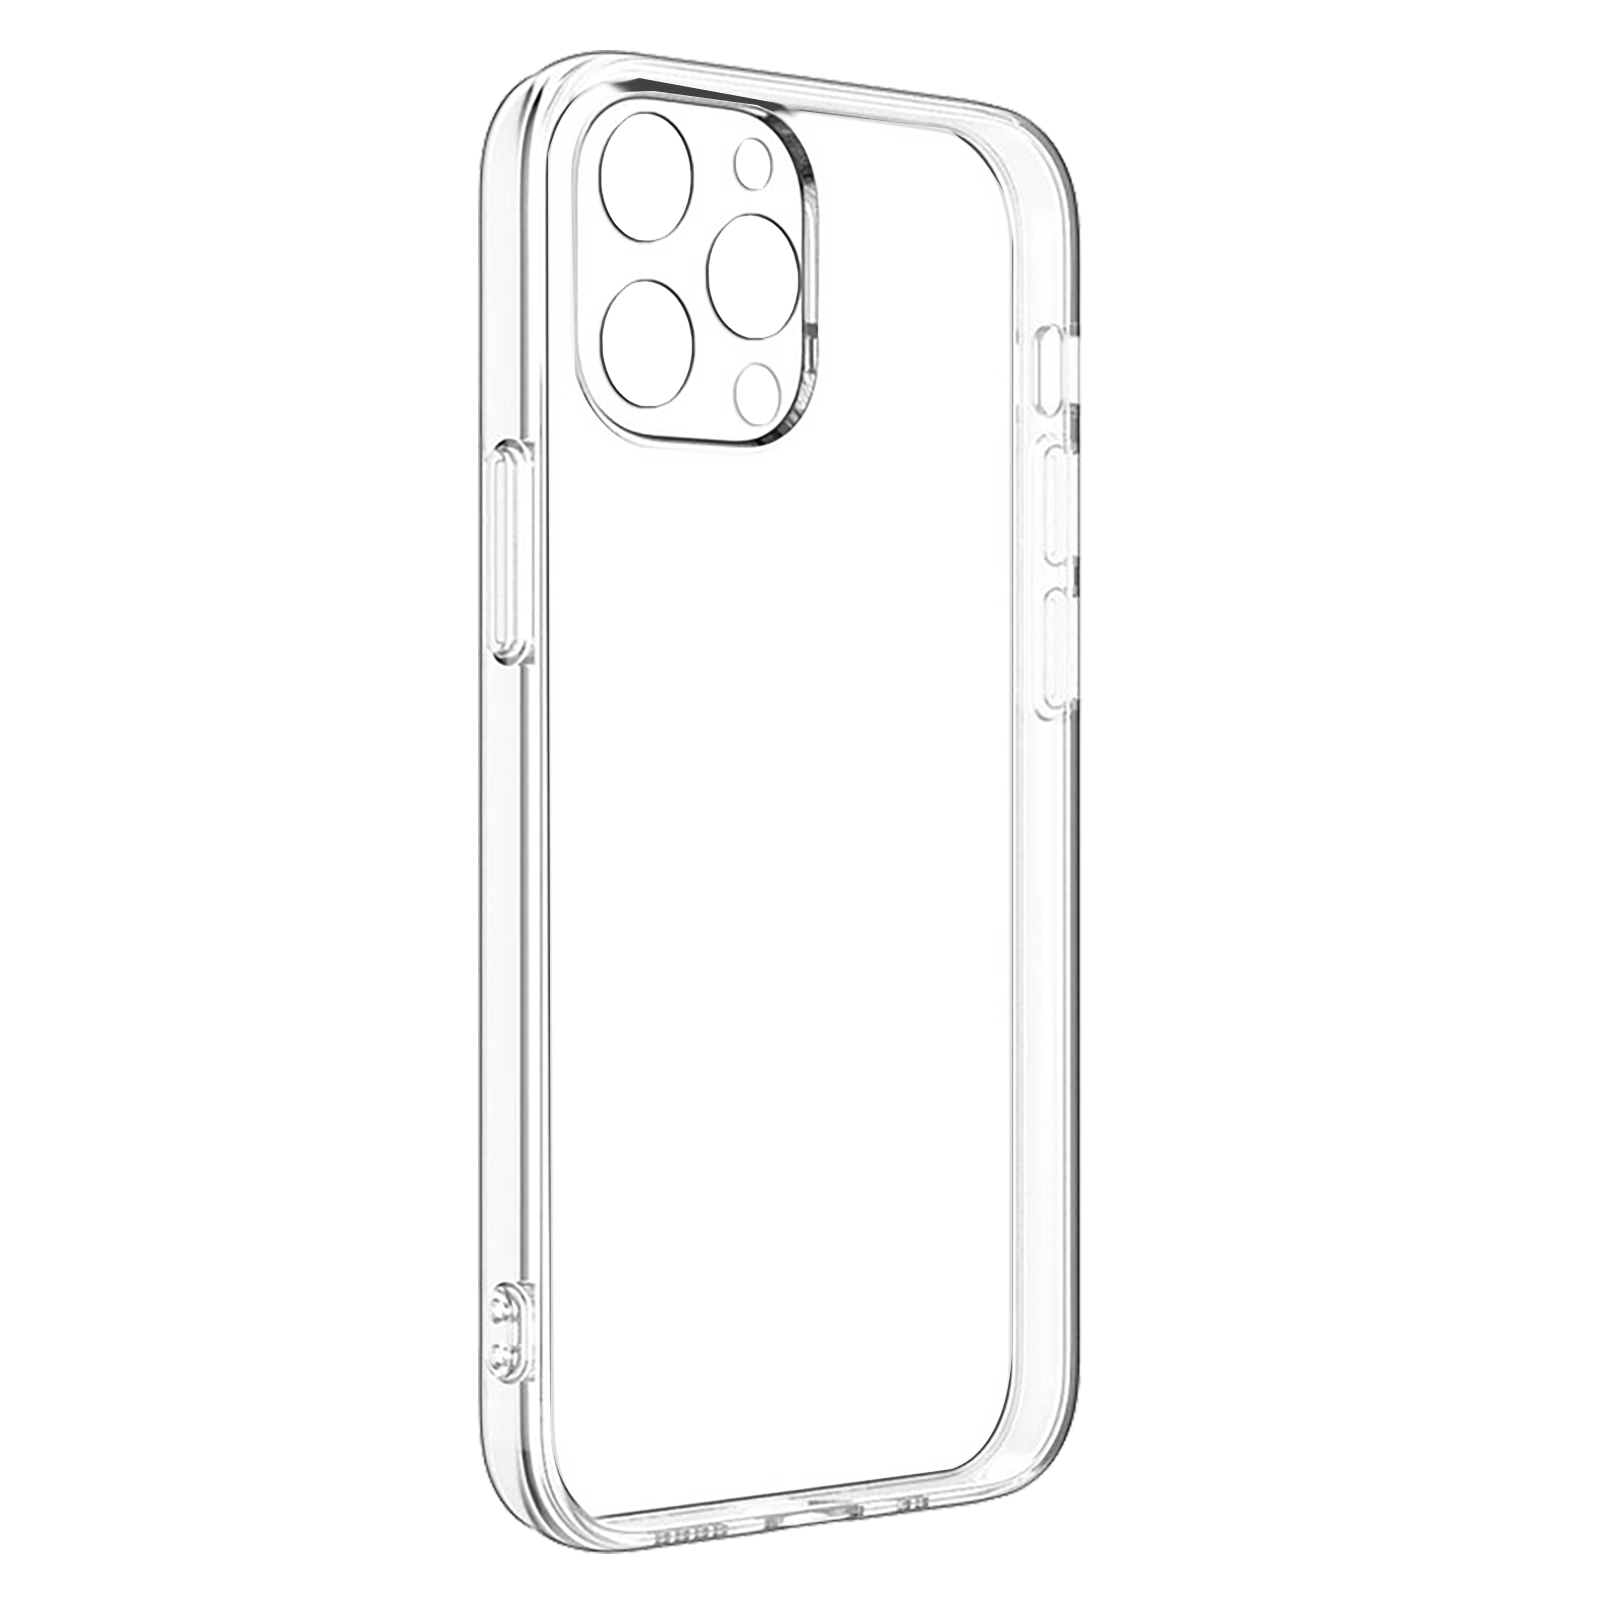 Dr. Vaku Silicon Back Cover for Apple iPhone 13 Pro (Scratch Resistant, Clear)